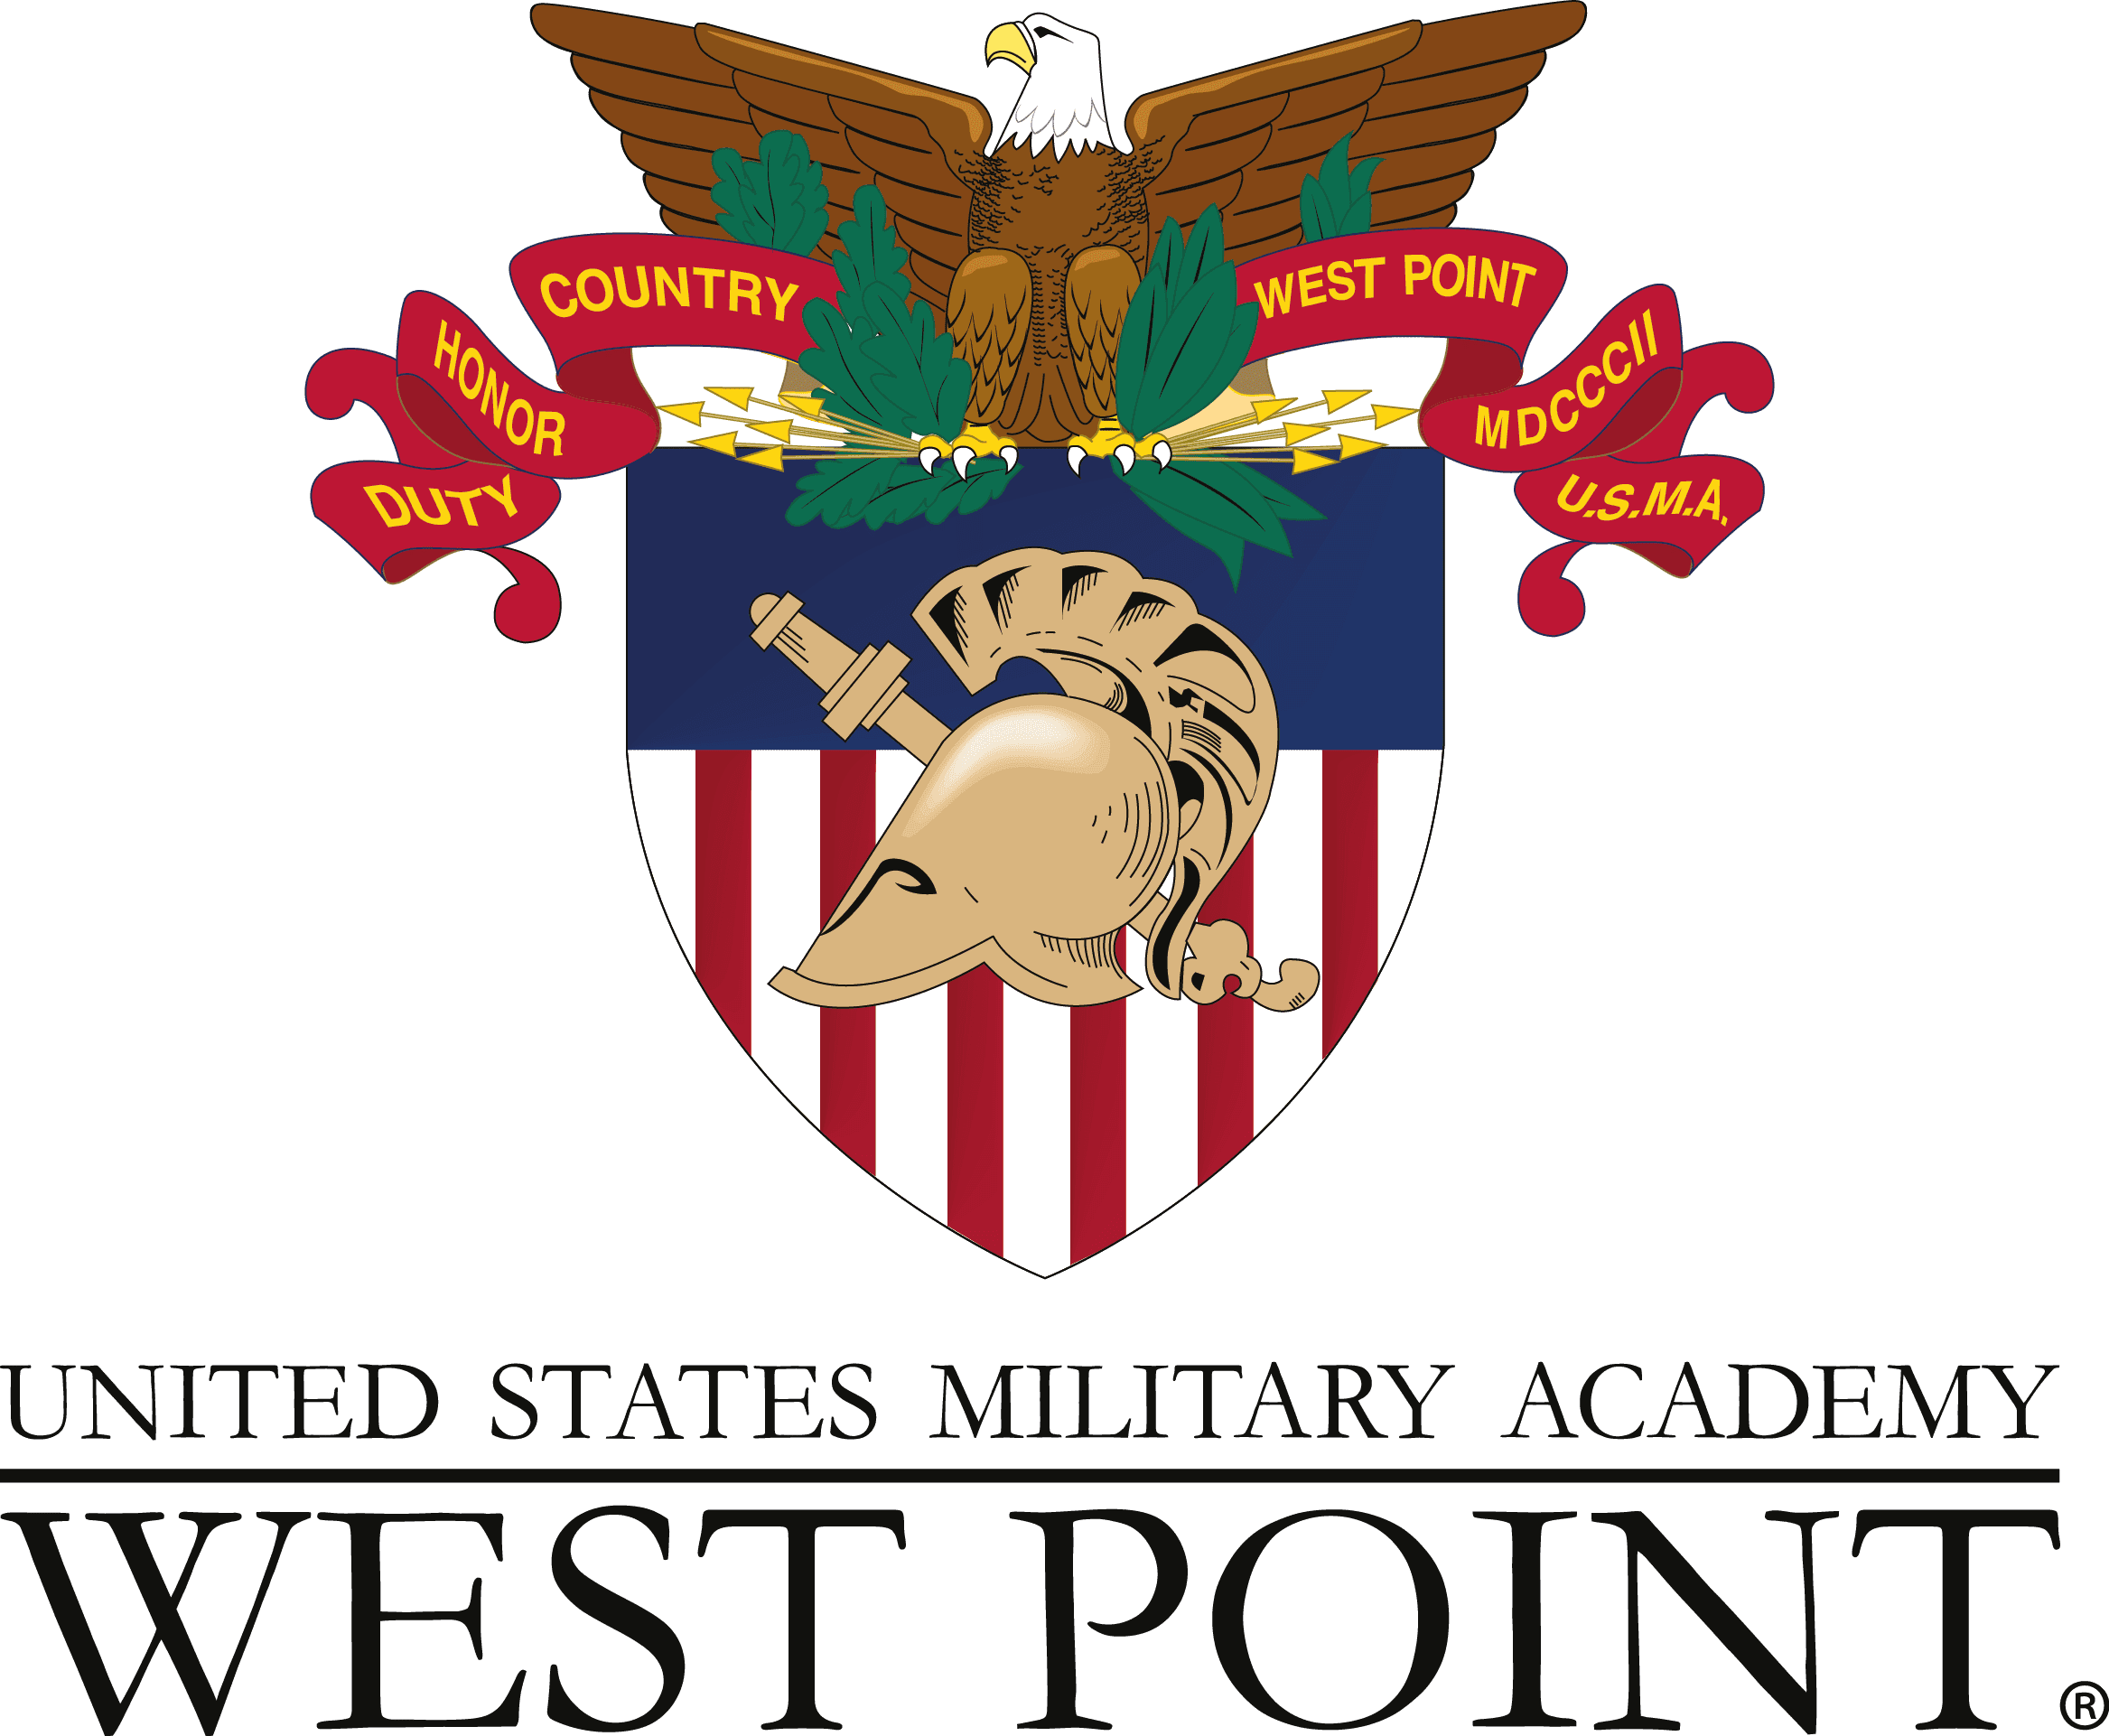 Seal of the U.S. Military Academy, West Point